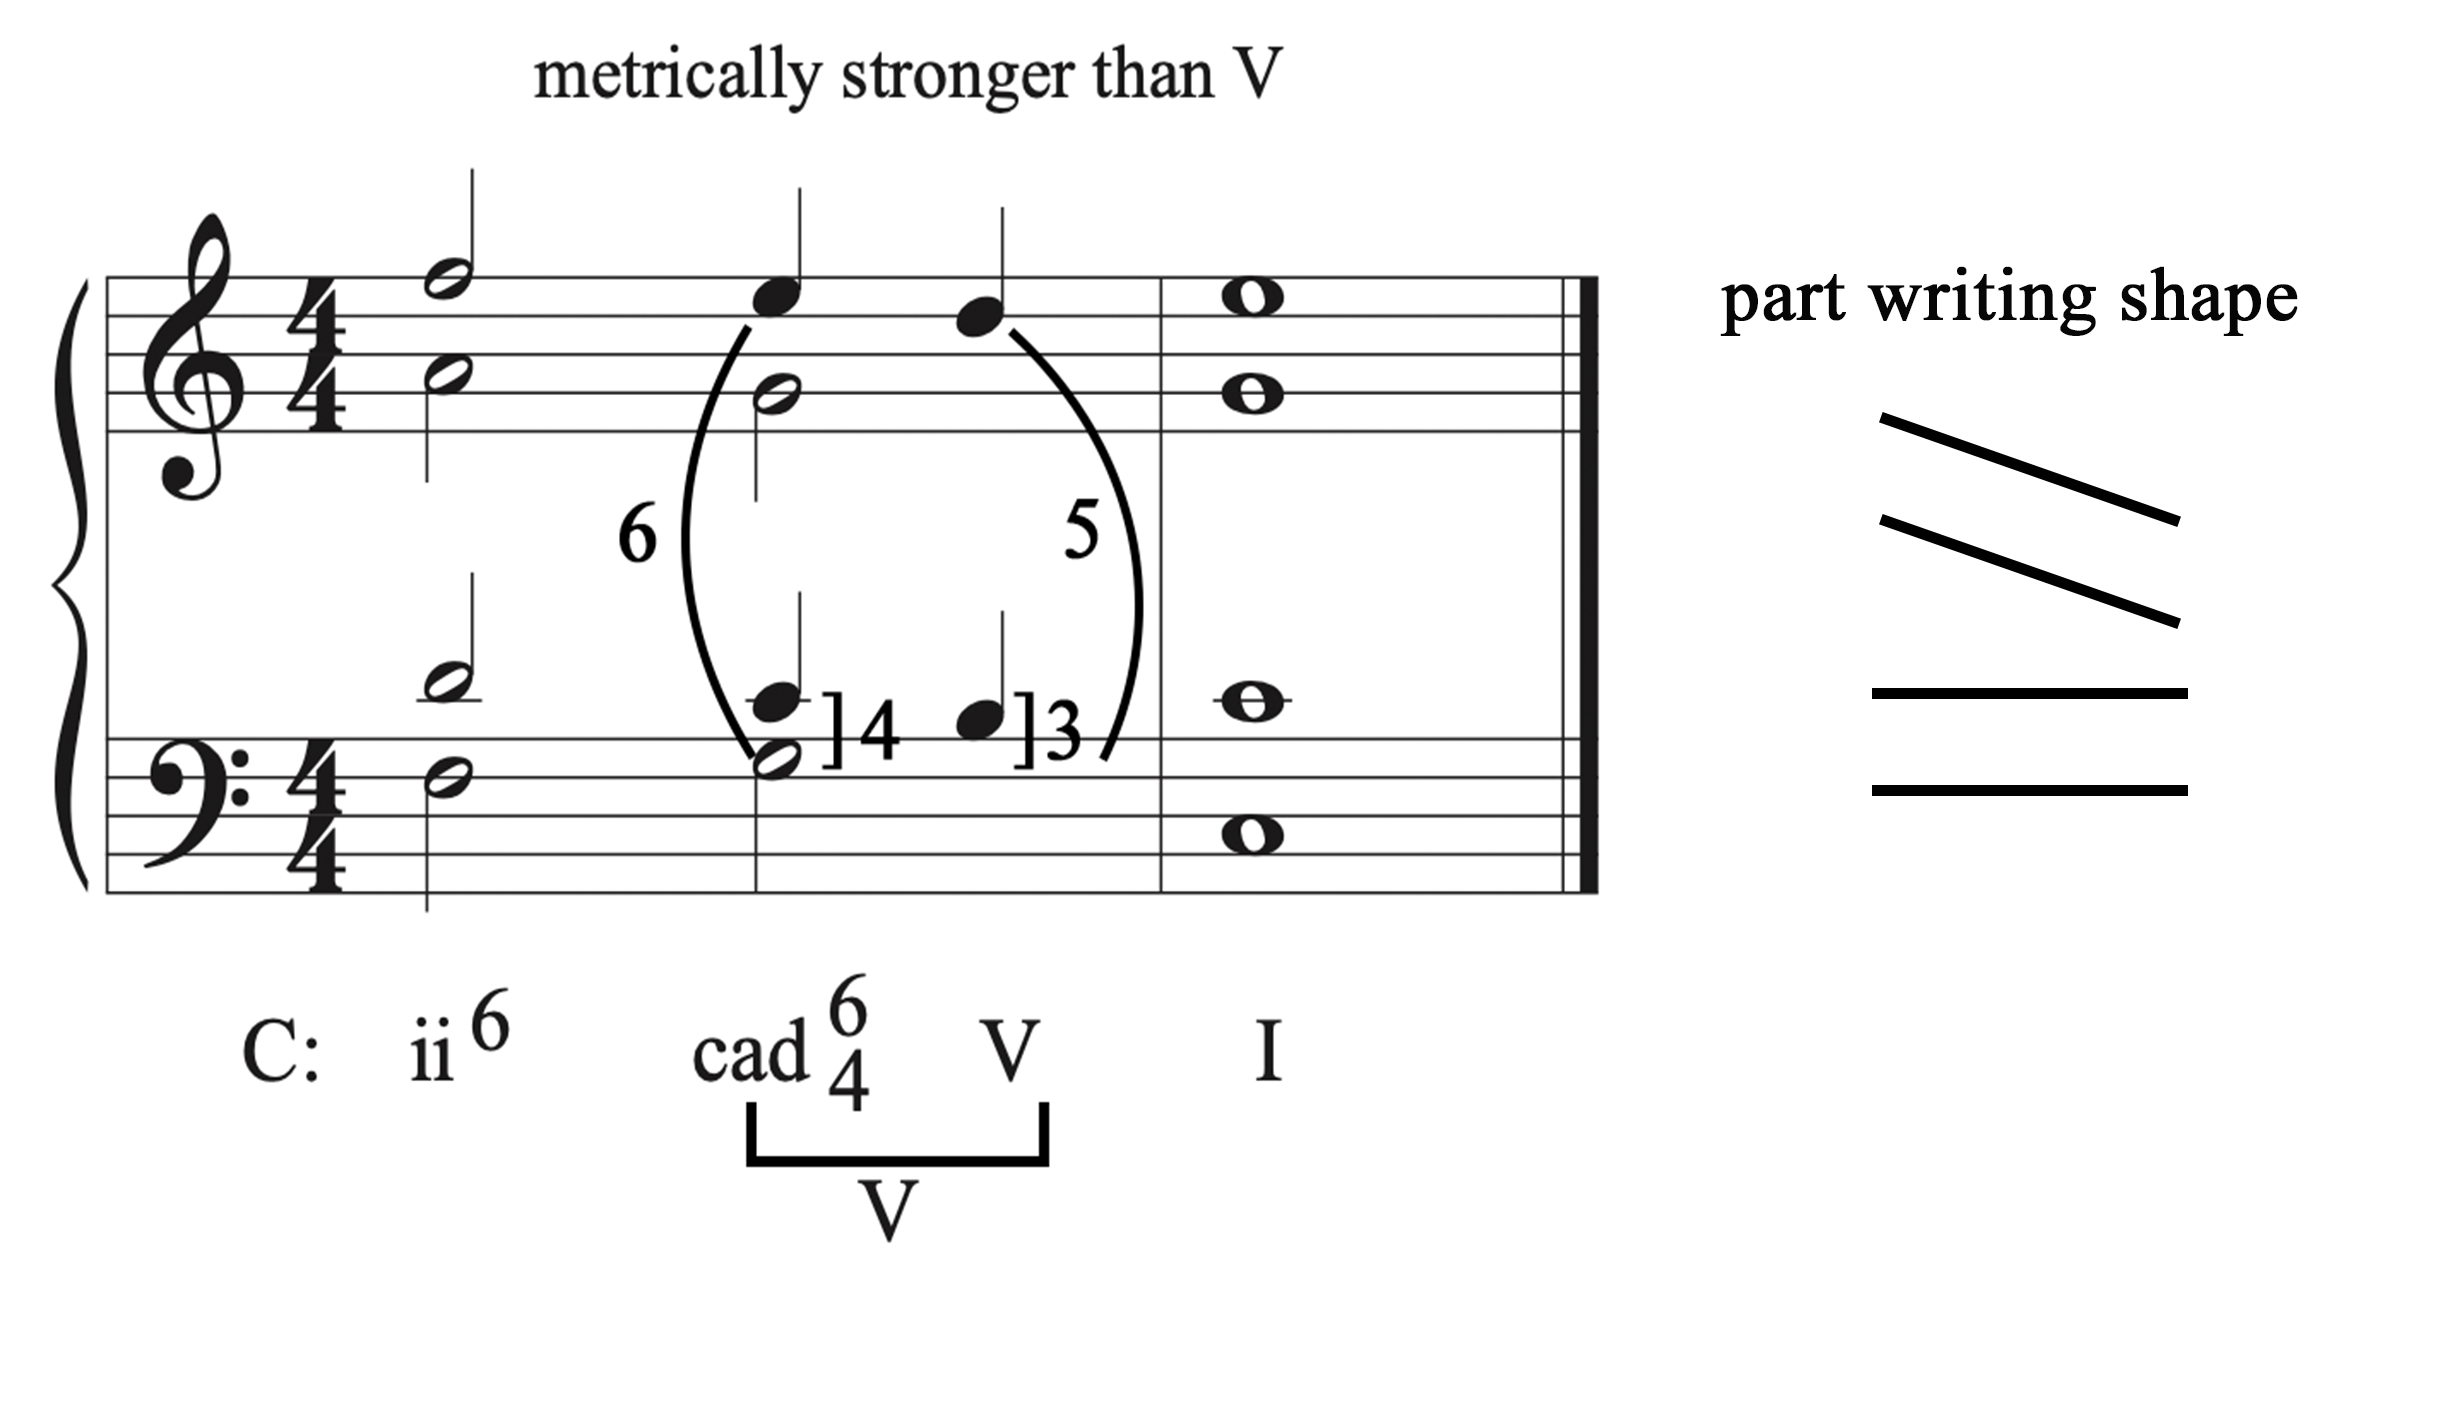 A musical example showing part writing for the cadential six-four chord and drawing the shape of the motion of all four voices.